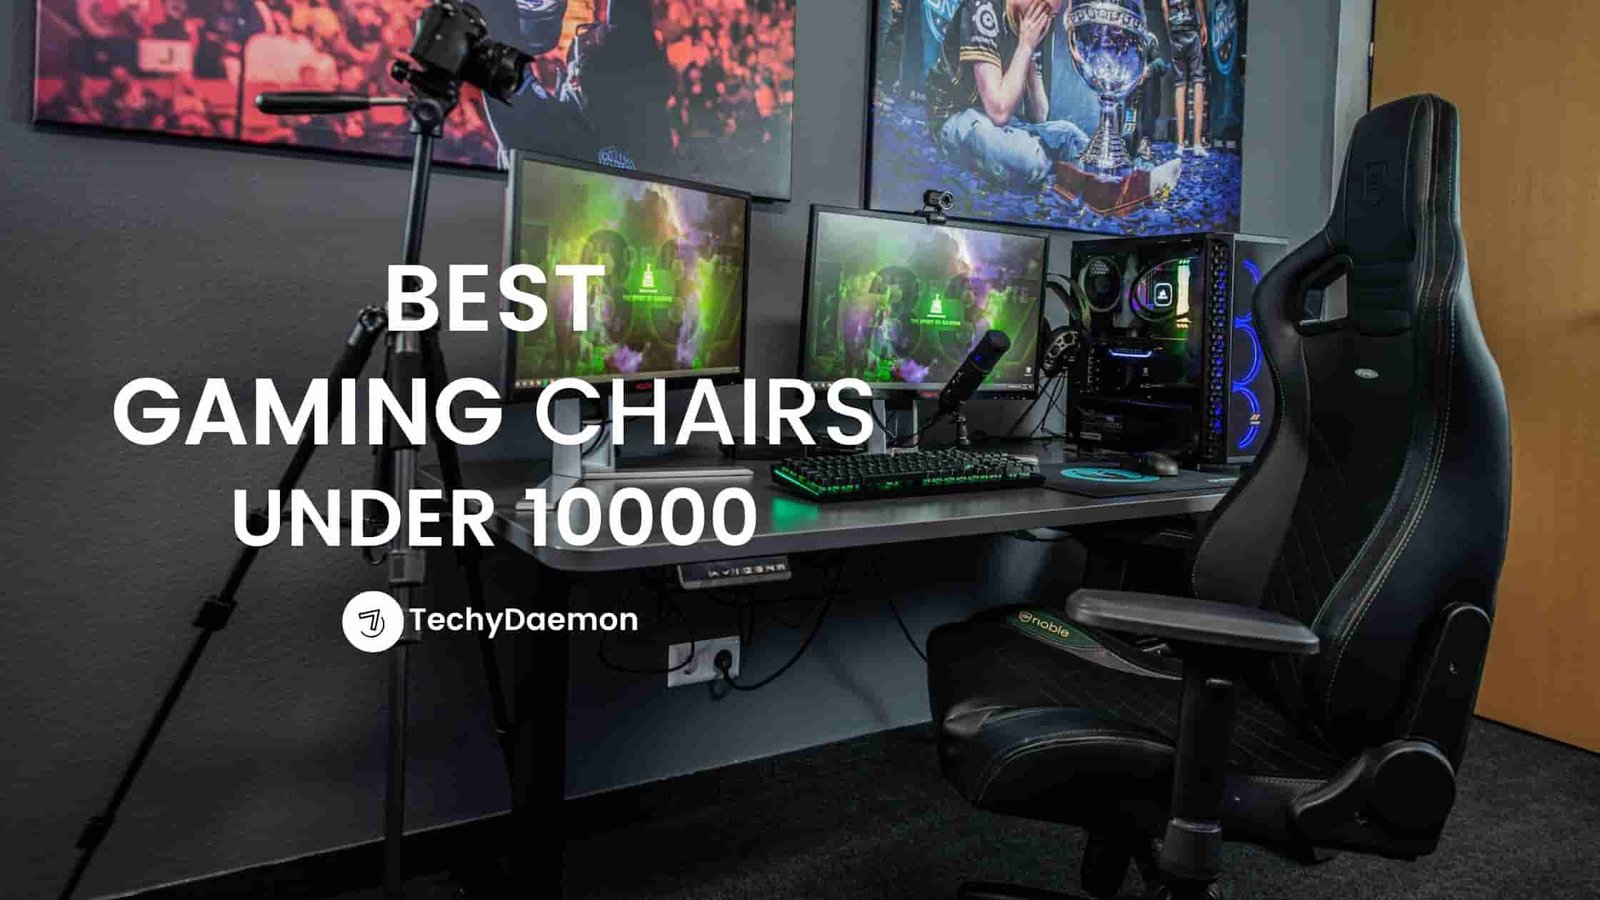 BEST GAMING CHAIR UNDER 10000 IN INDIA